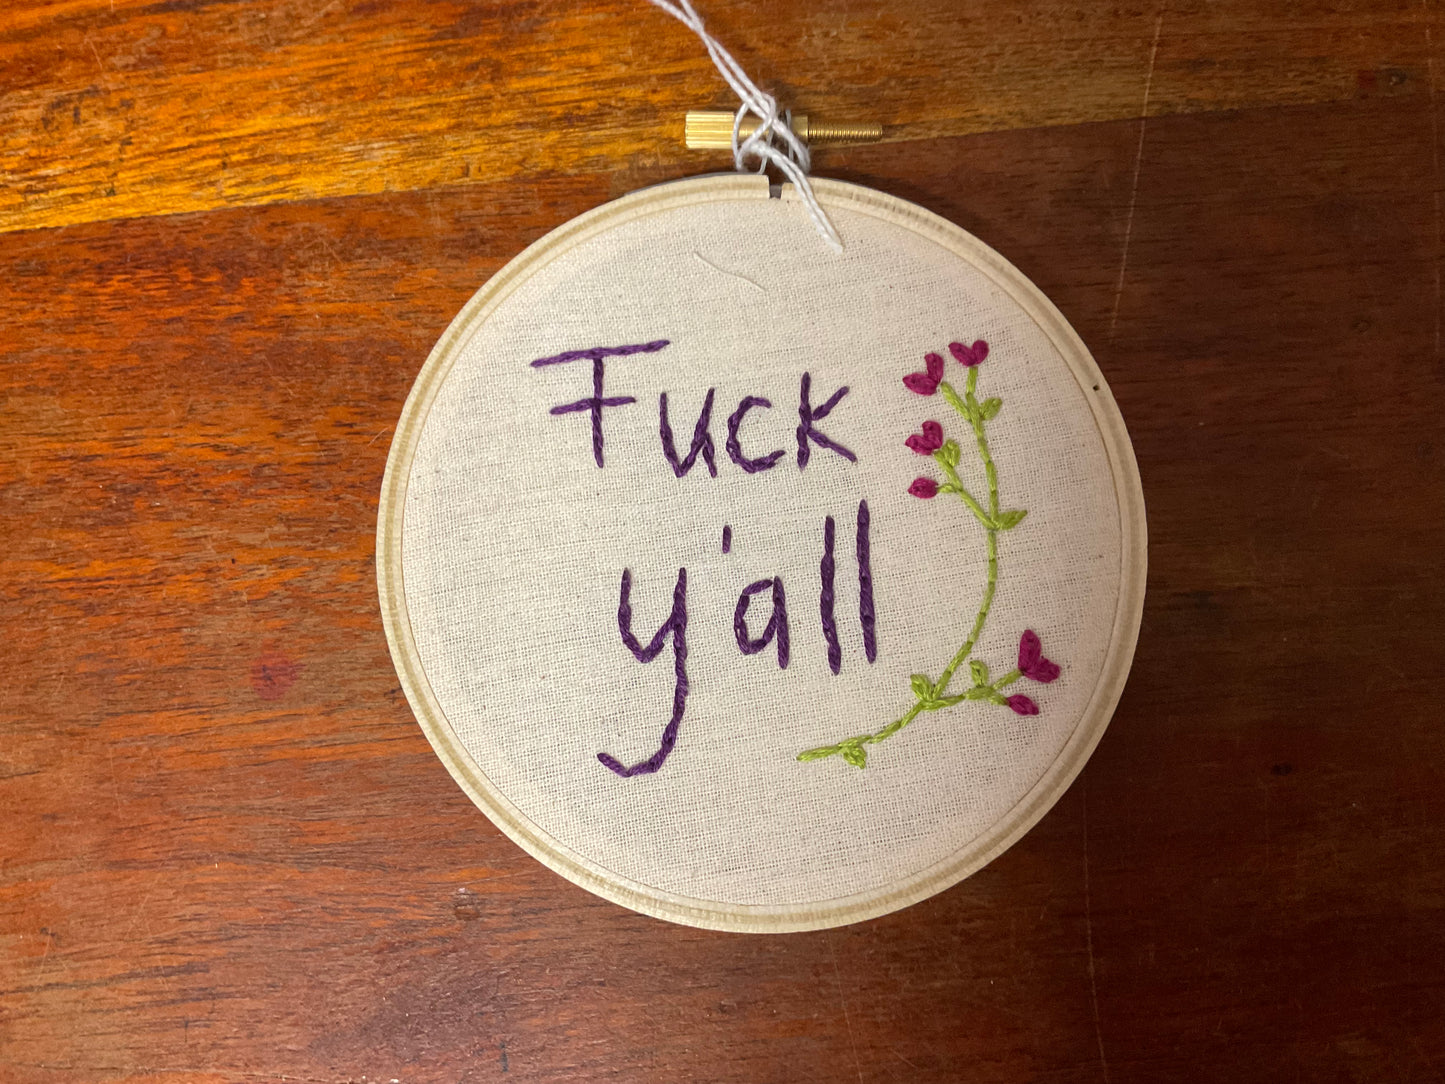 Naughty Corner Embroidery - F*ck y'all 10cm